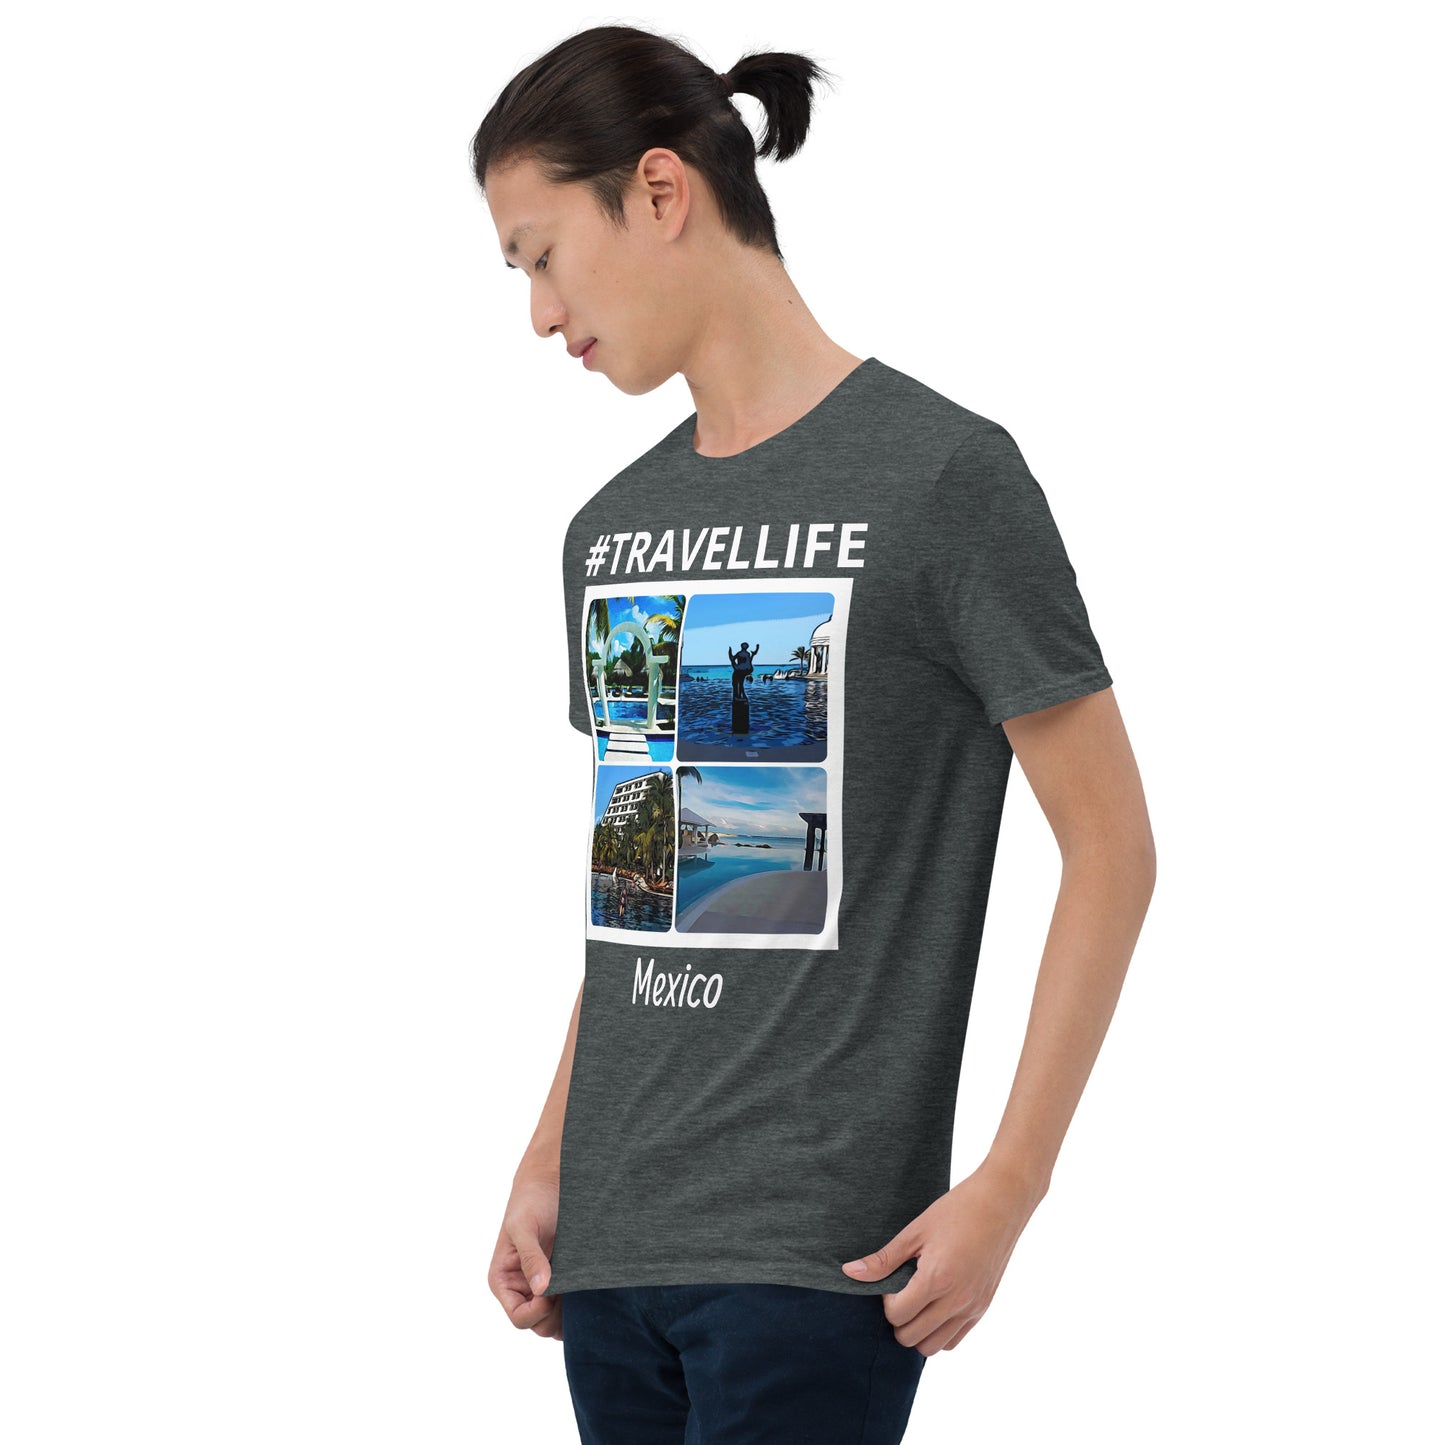 #Travellife "Mexi-Collage" Unisex T-Shirt